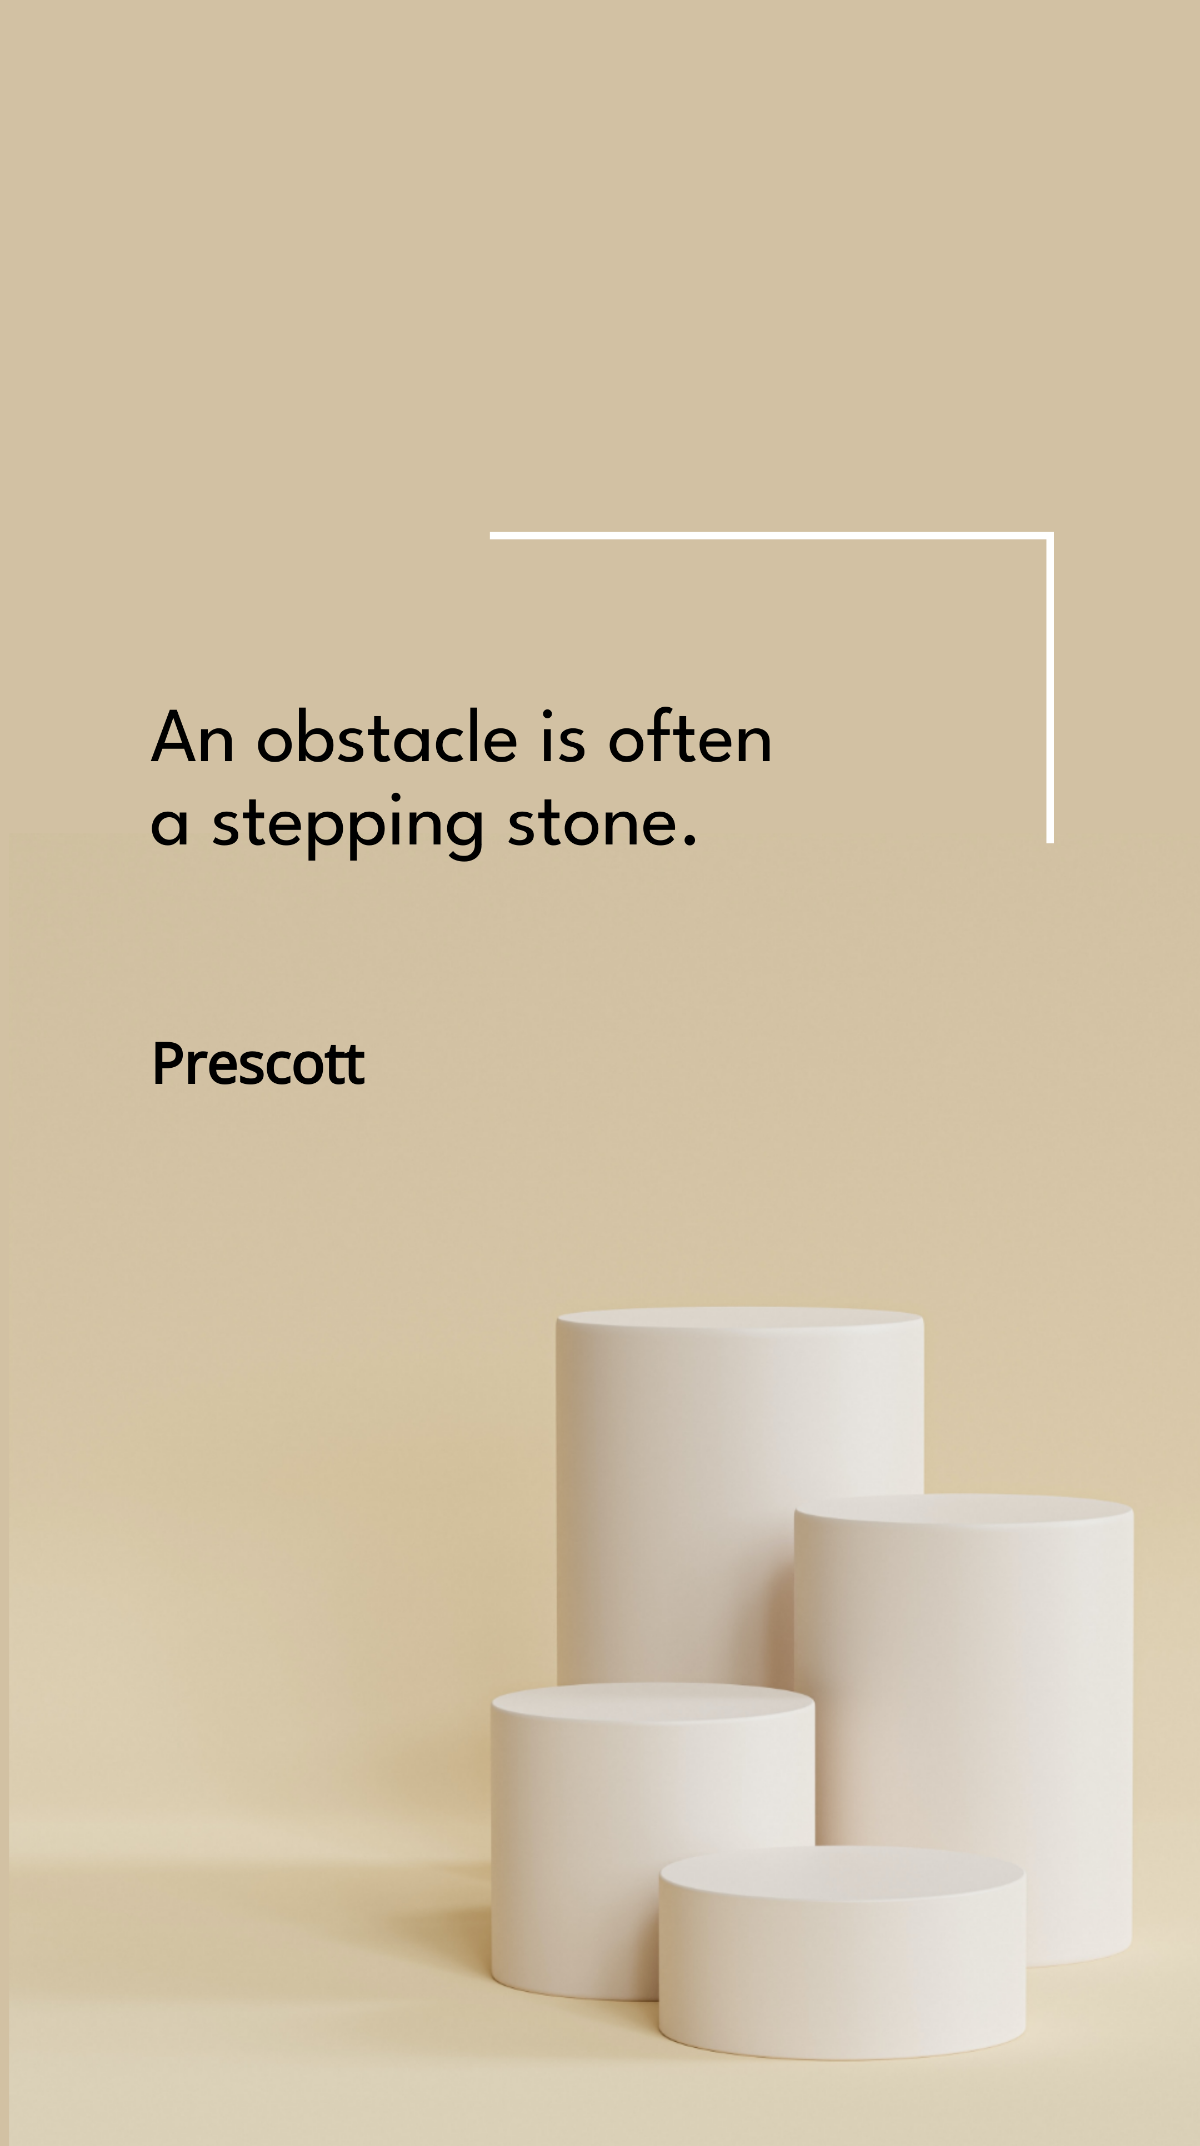 Prescott - An obstacle is often a stepping stone